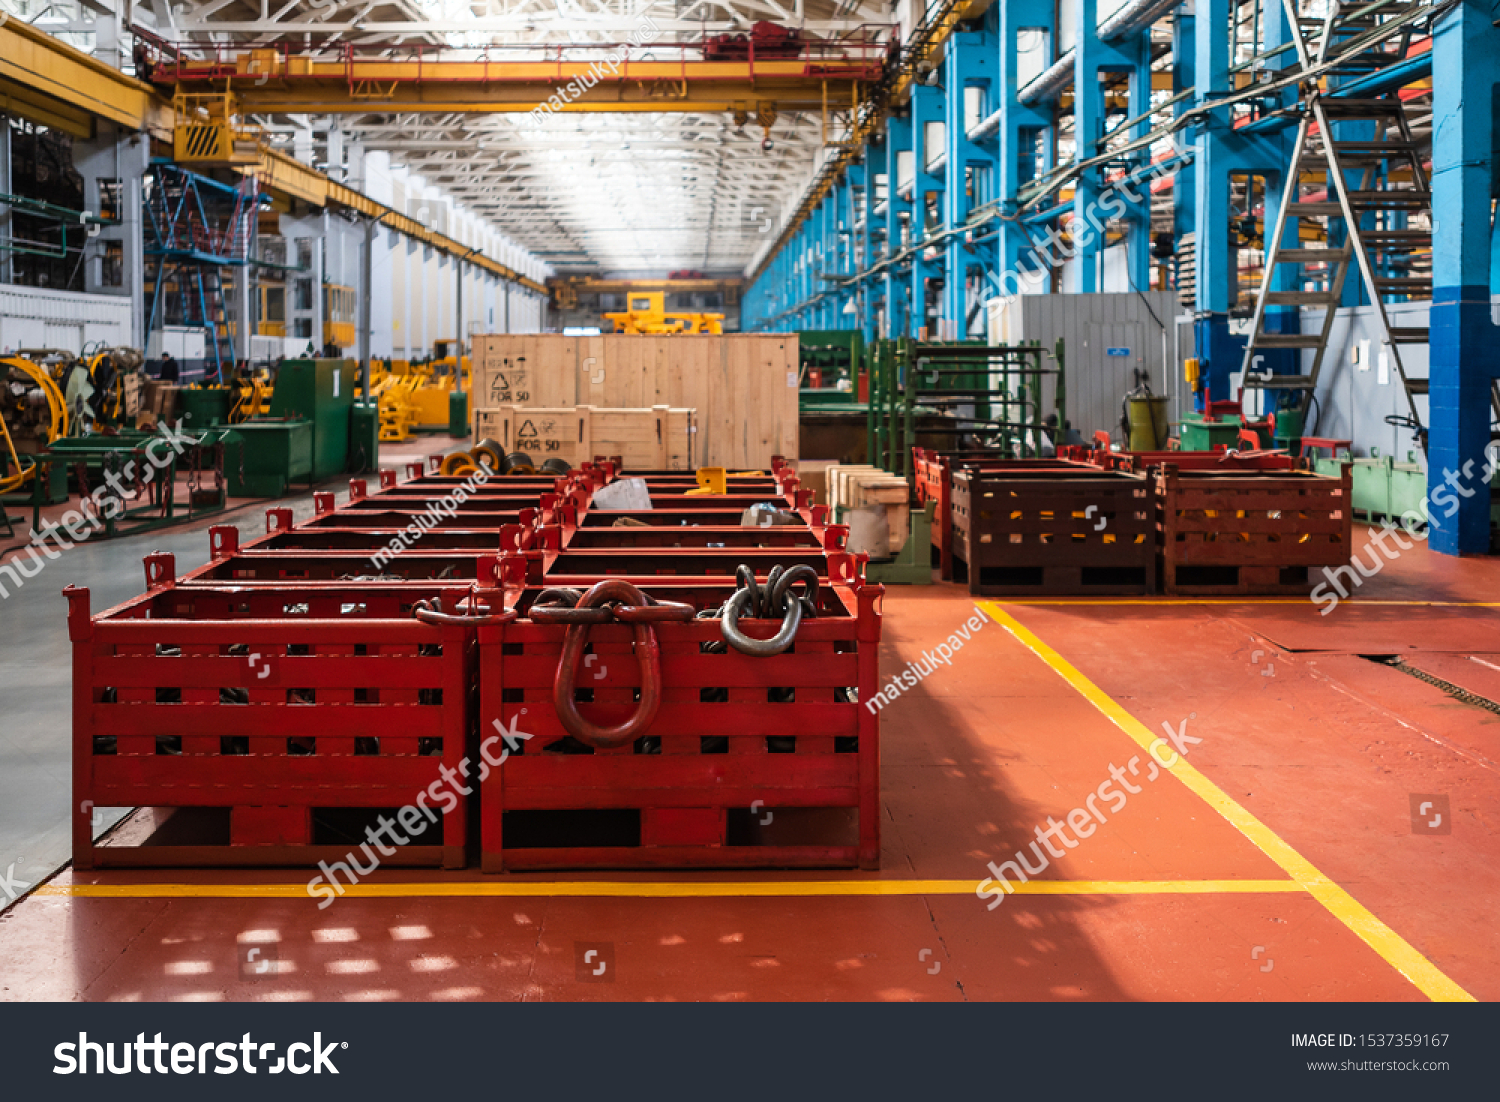 Equipment for the production of cars on the background of production #1537359167